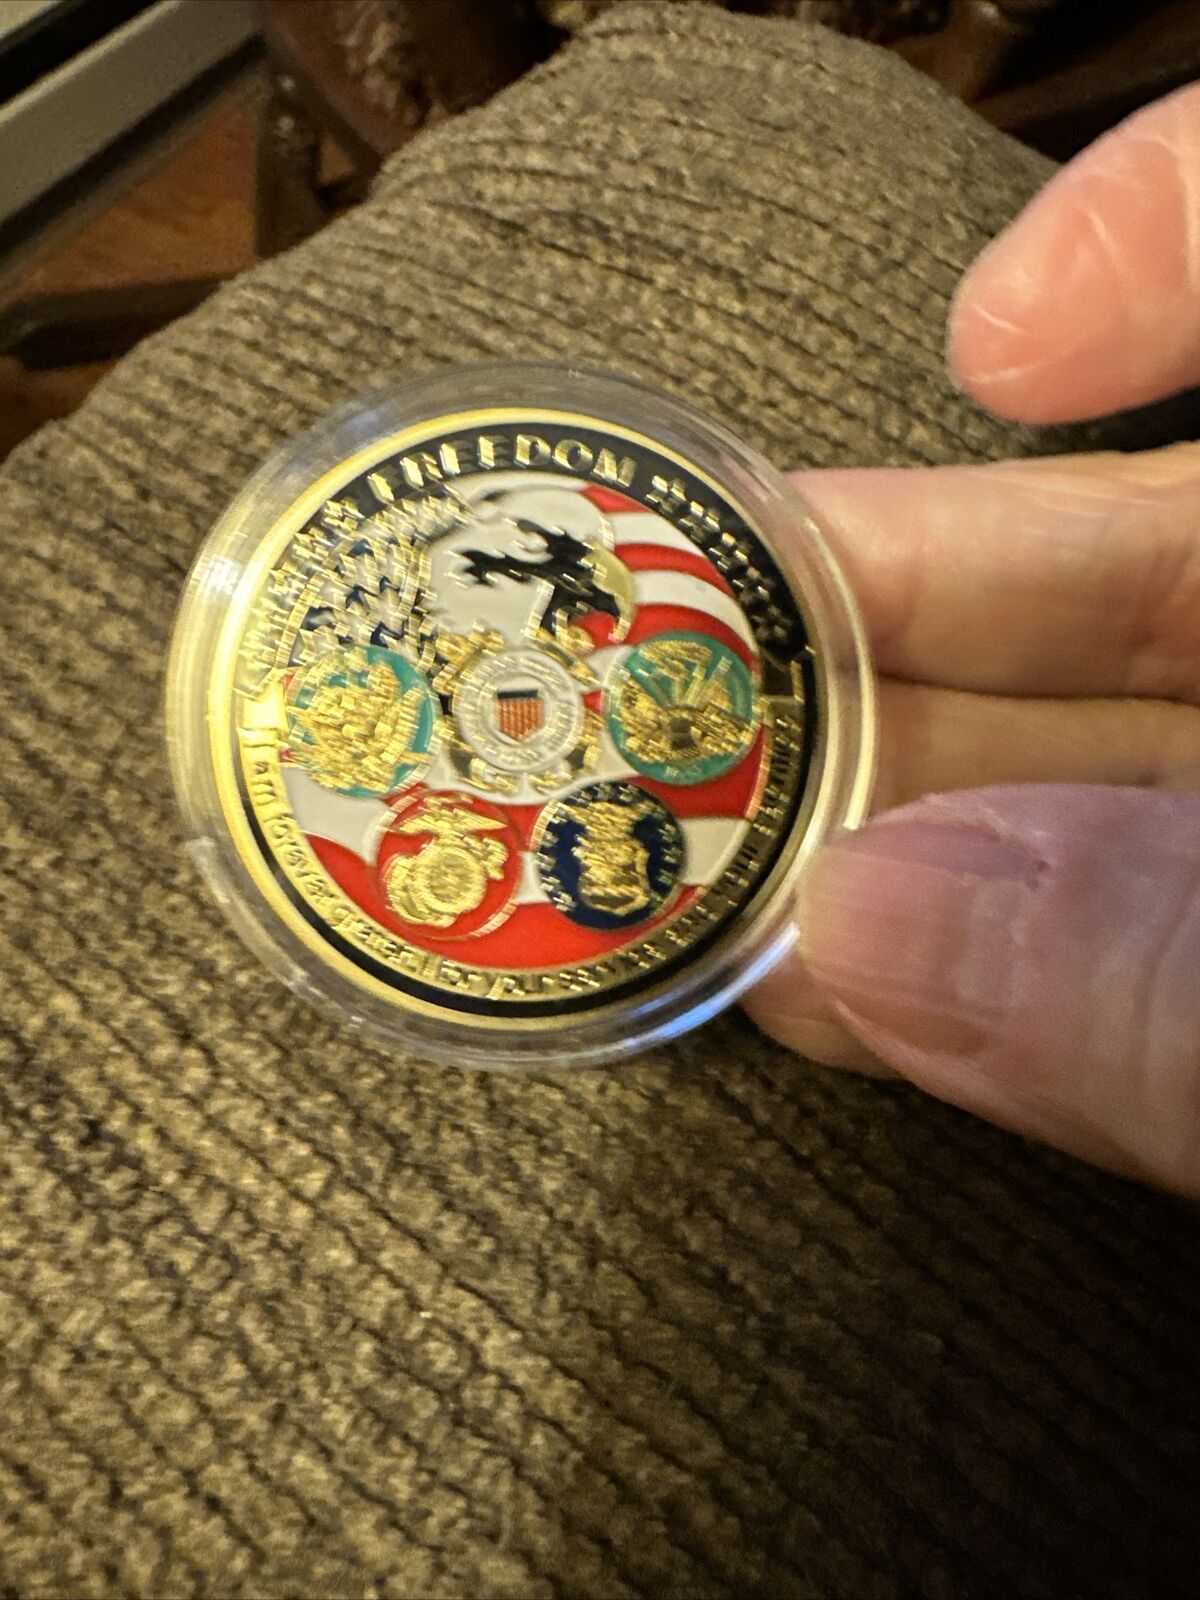 Awesome Freedom Eagle Coin featuring all 5 Armed Forces Branches